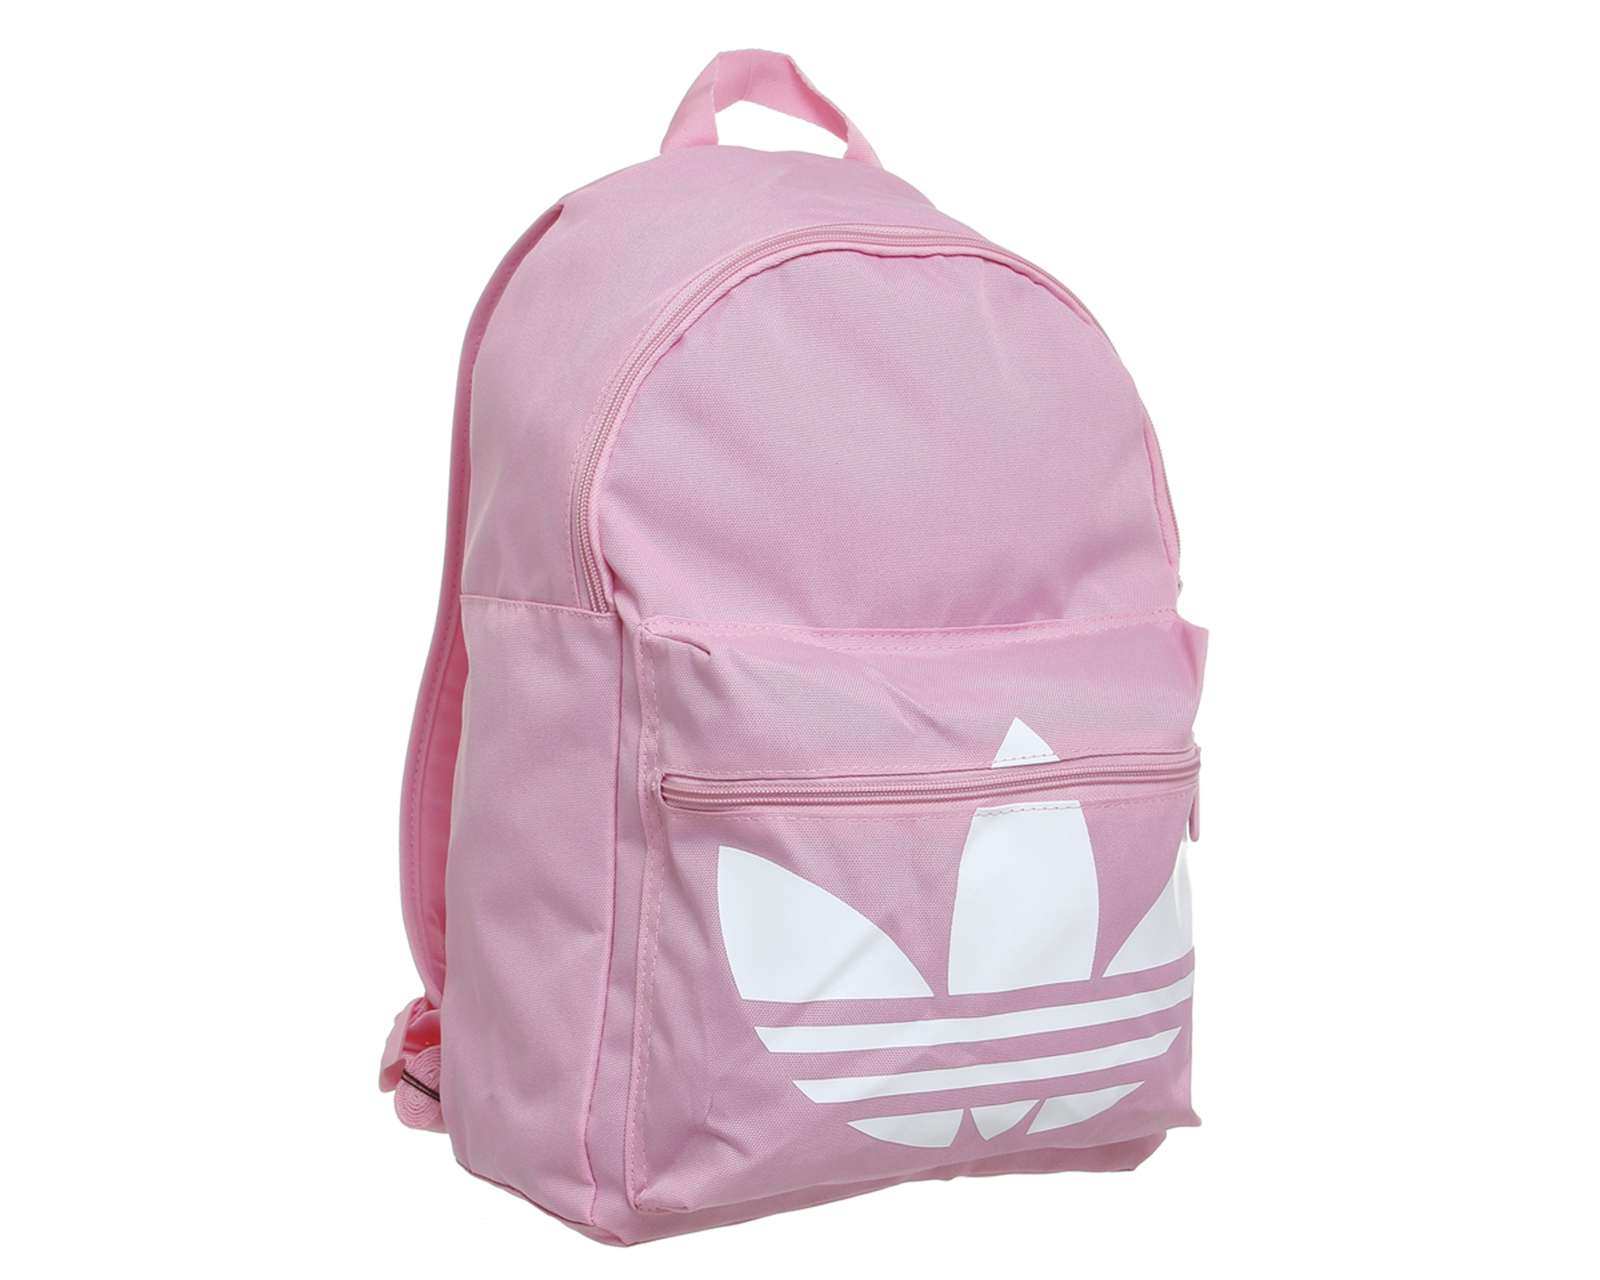 adidas Originals Trefoil Canvas Backpack in Pink - Lyst